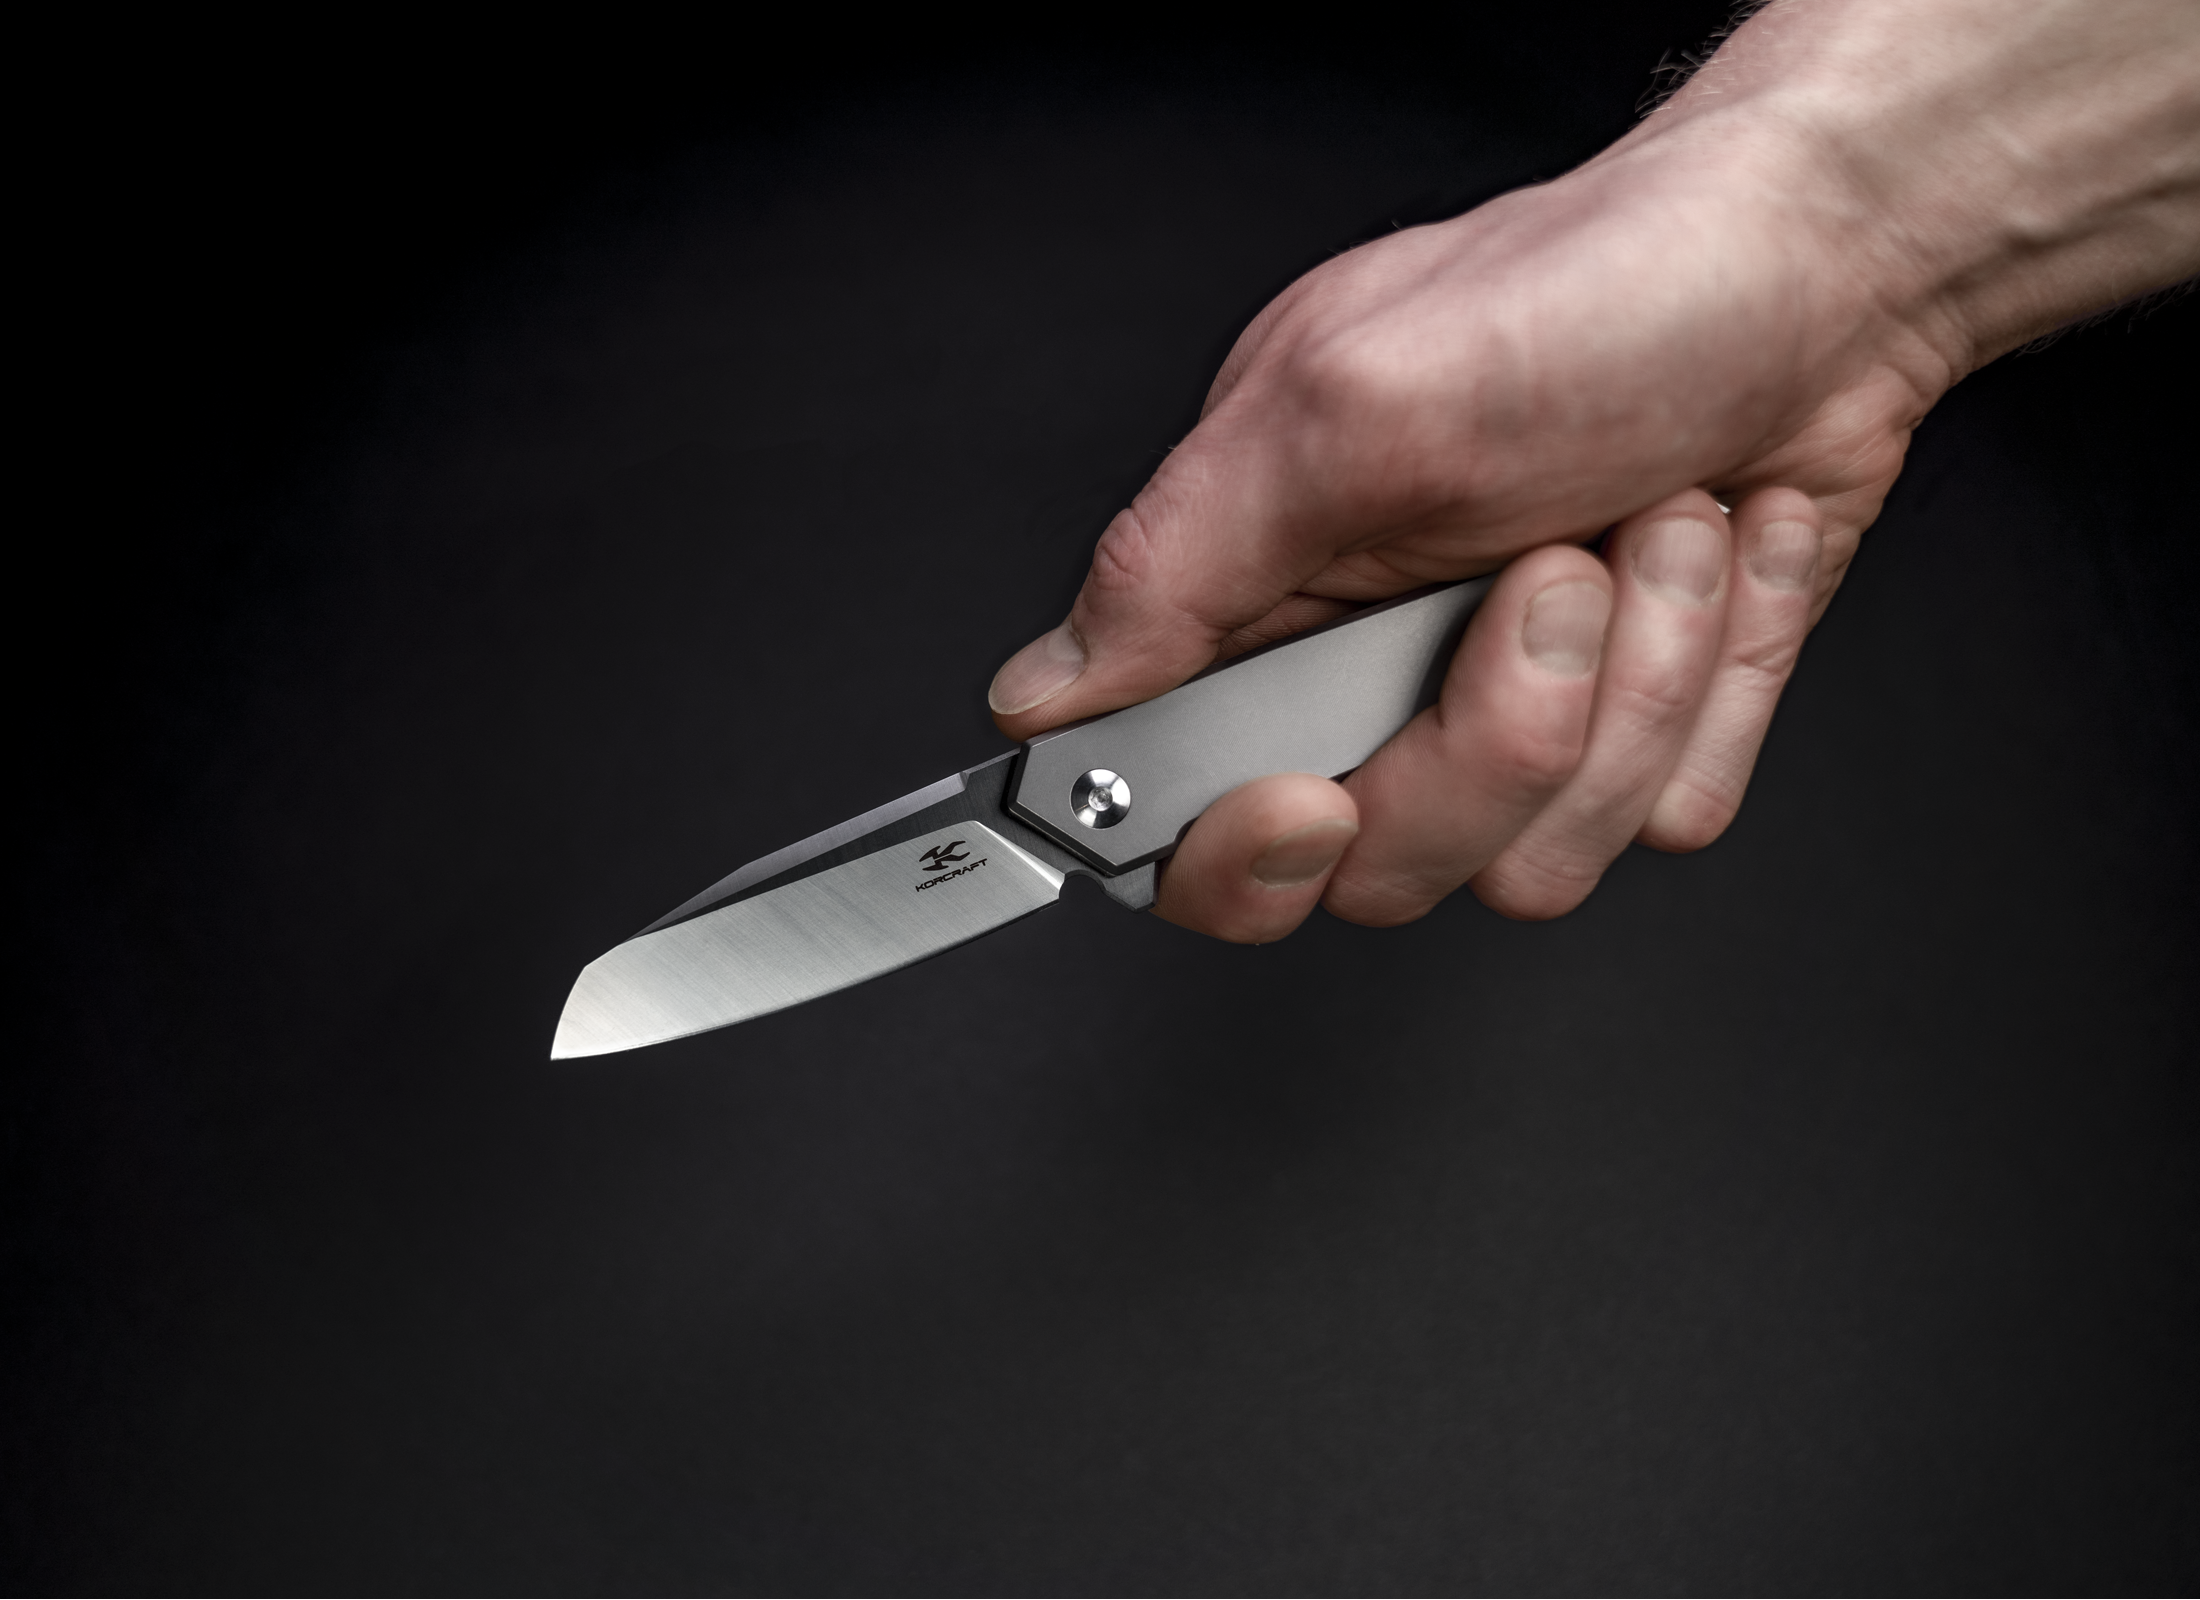 The Rixa by Korcraft, titanium handle and D2 blade open held in the hand on black background